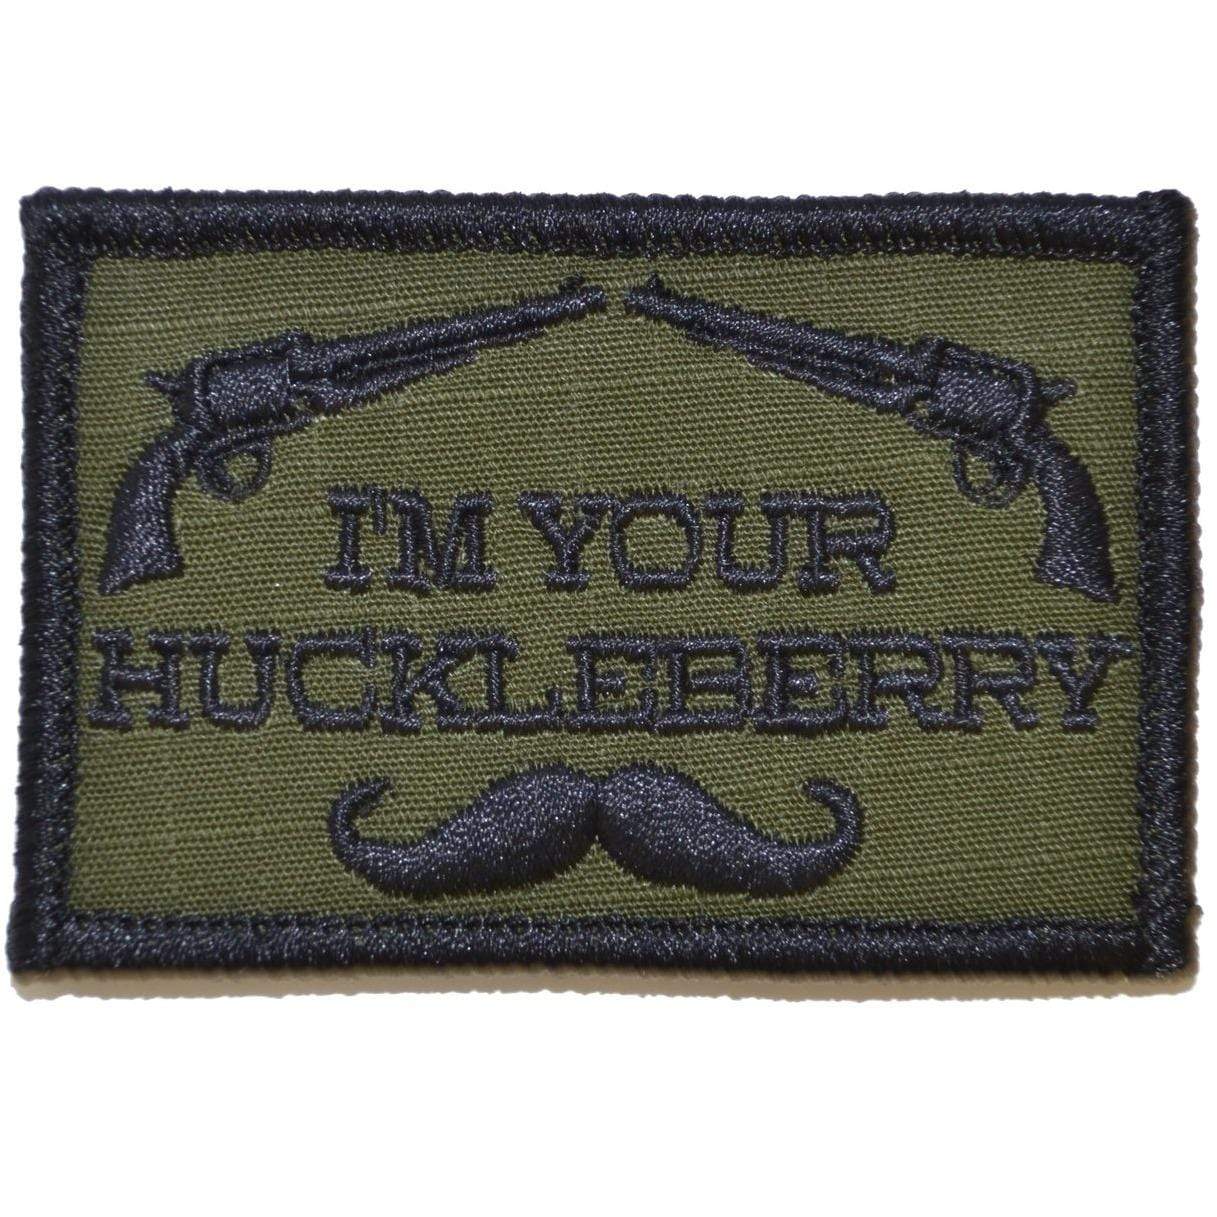 Tactical Gear Junkie Patches Olive Drab I'm Your Huckleberry - 2x3 Hat Patch